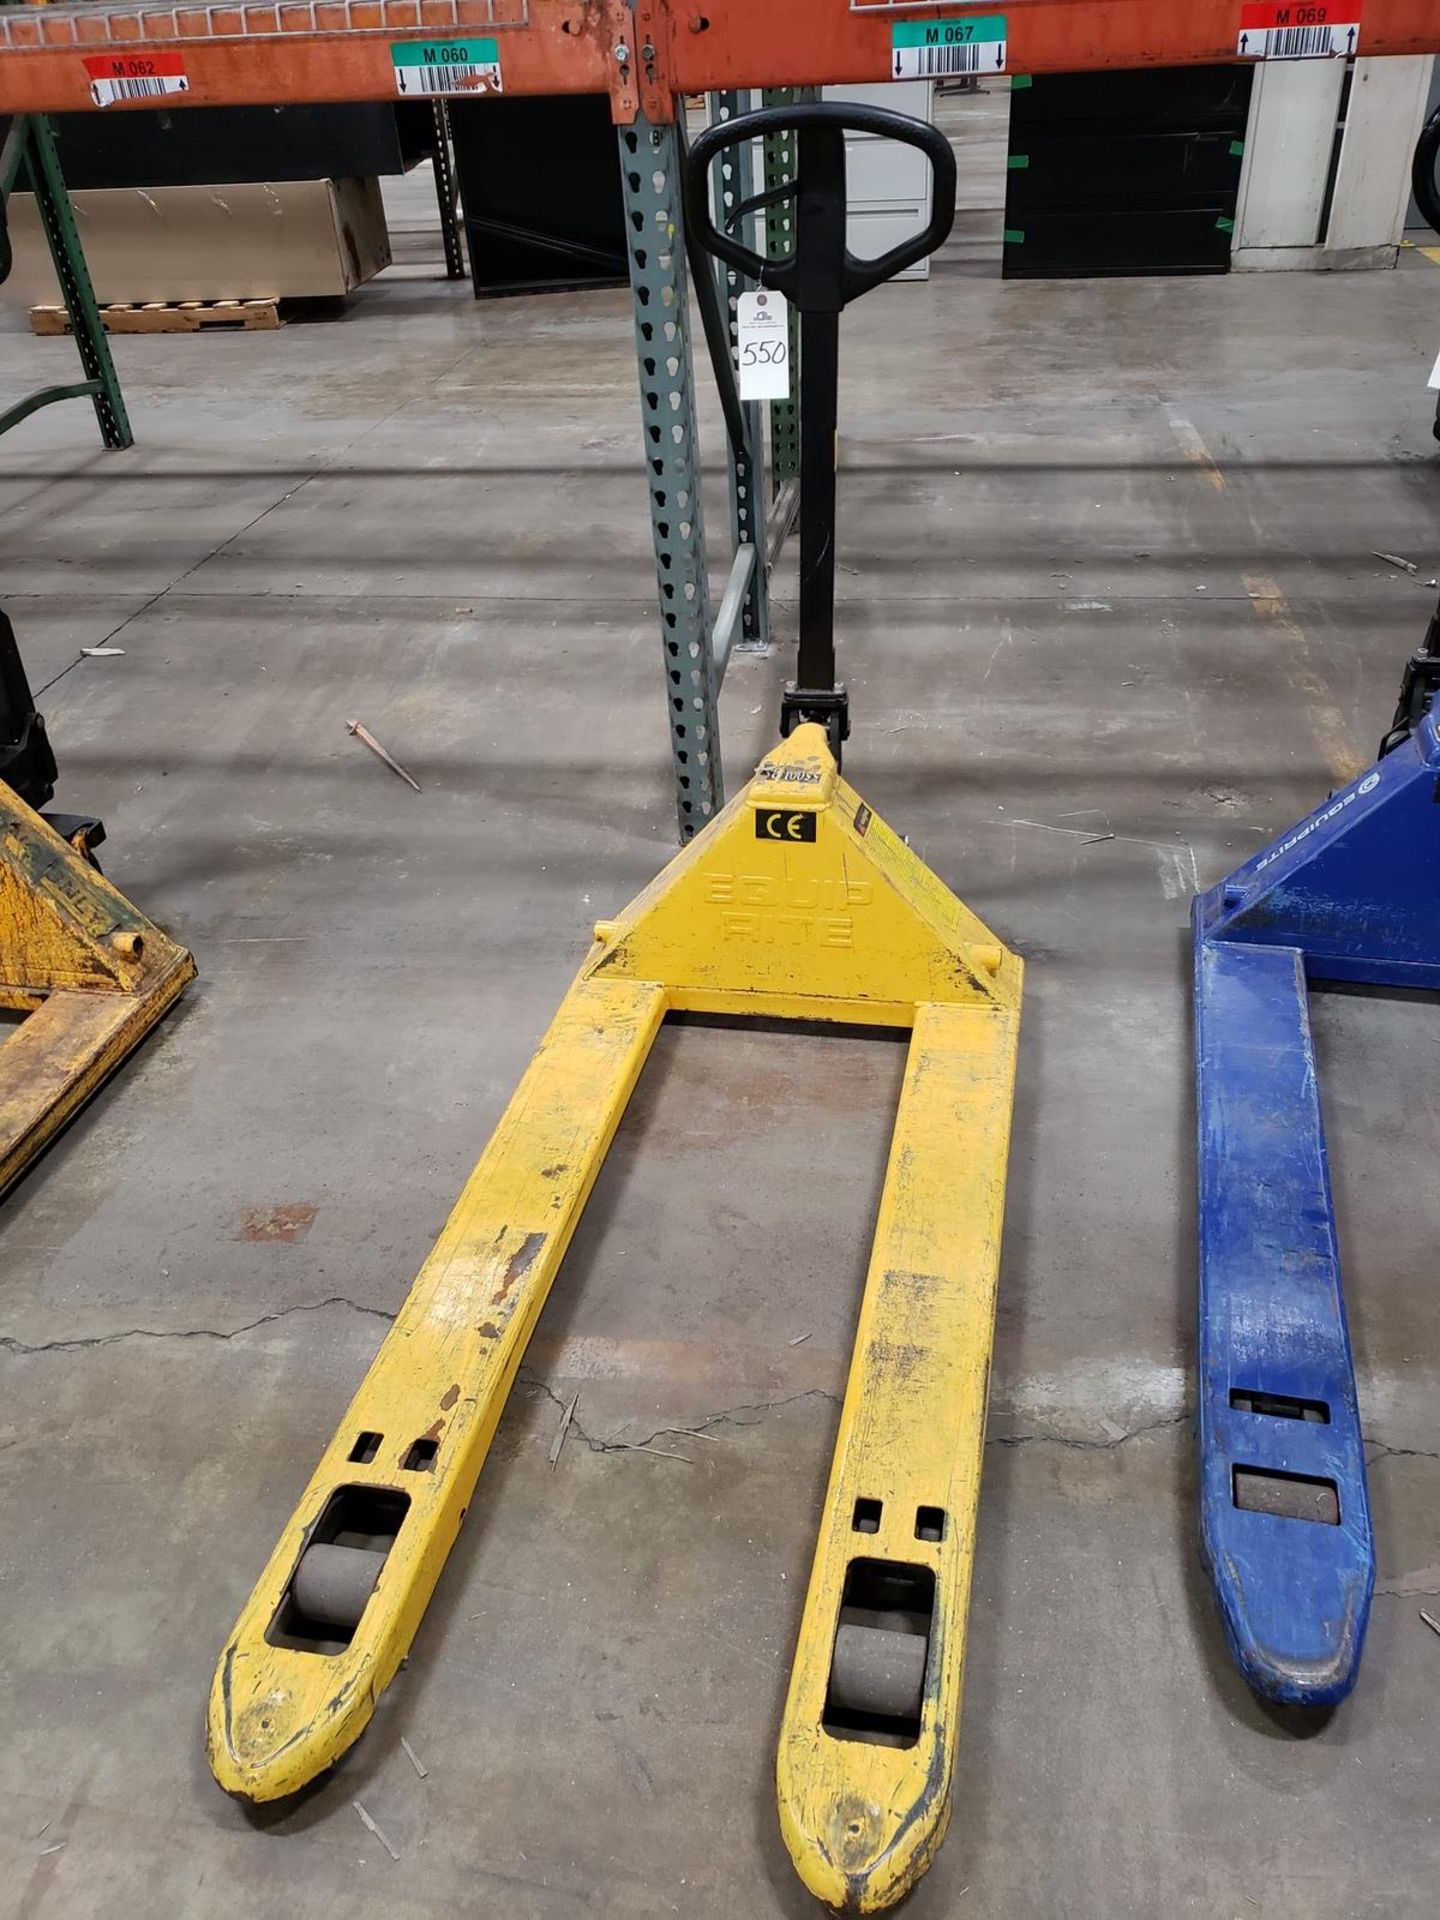 Pallet Jack | Rig Fee No Charge